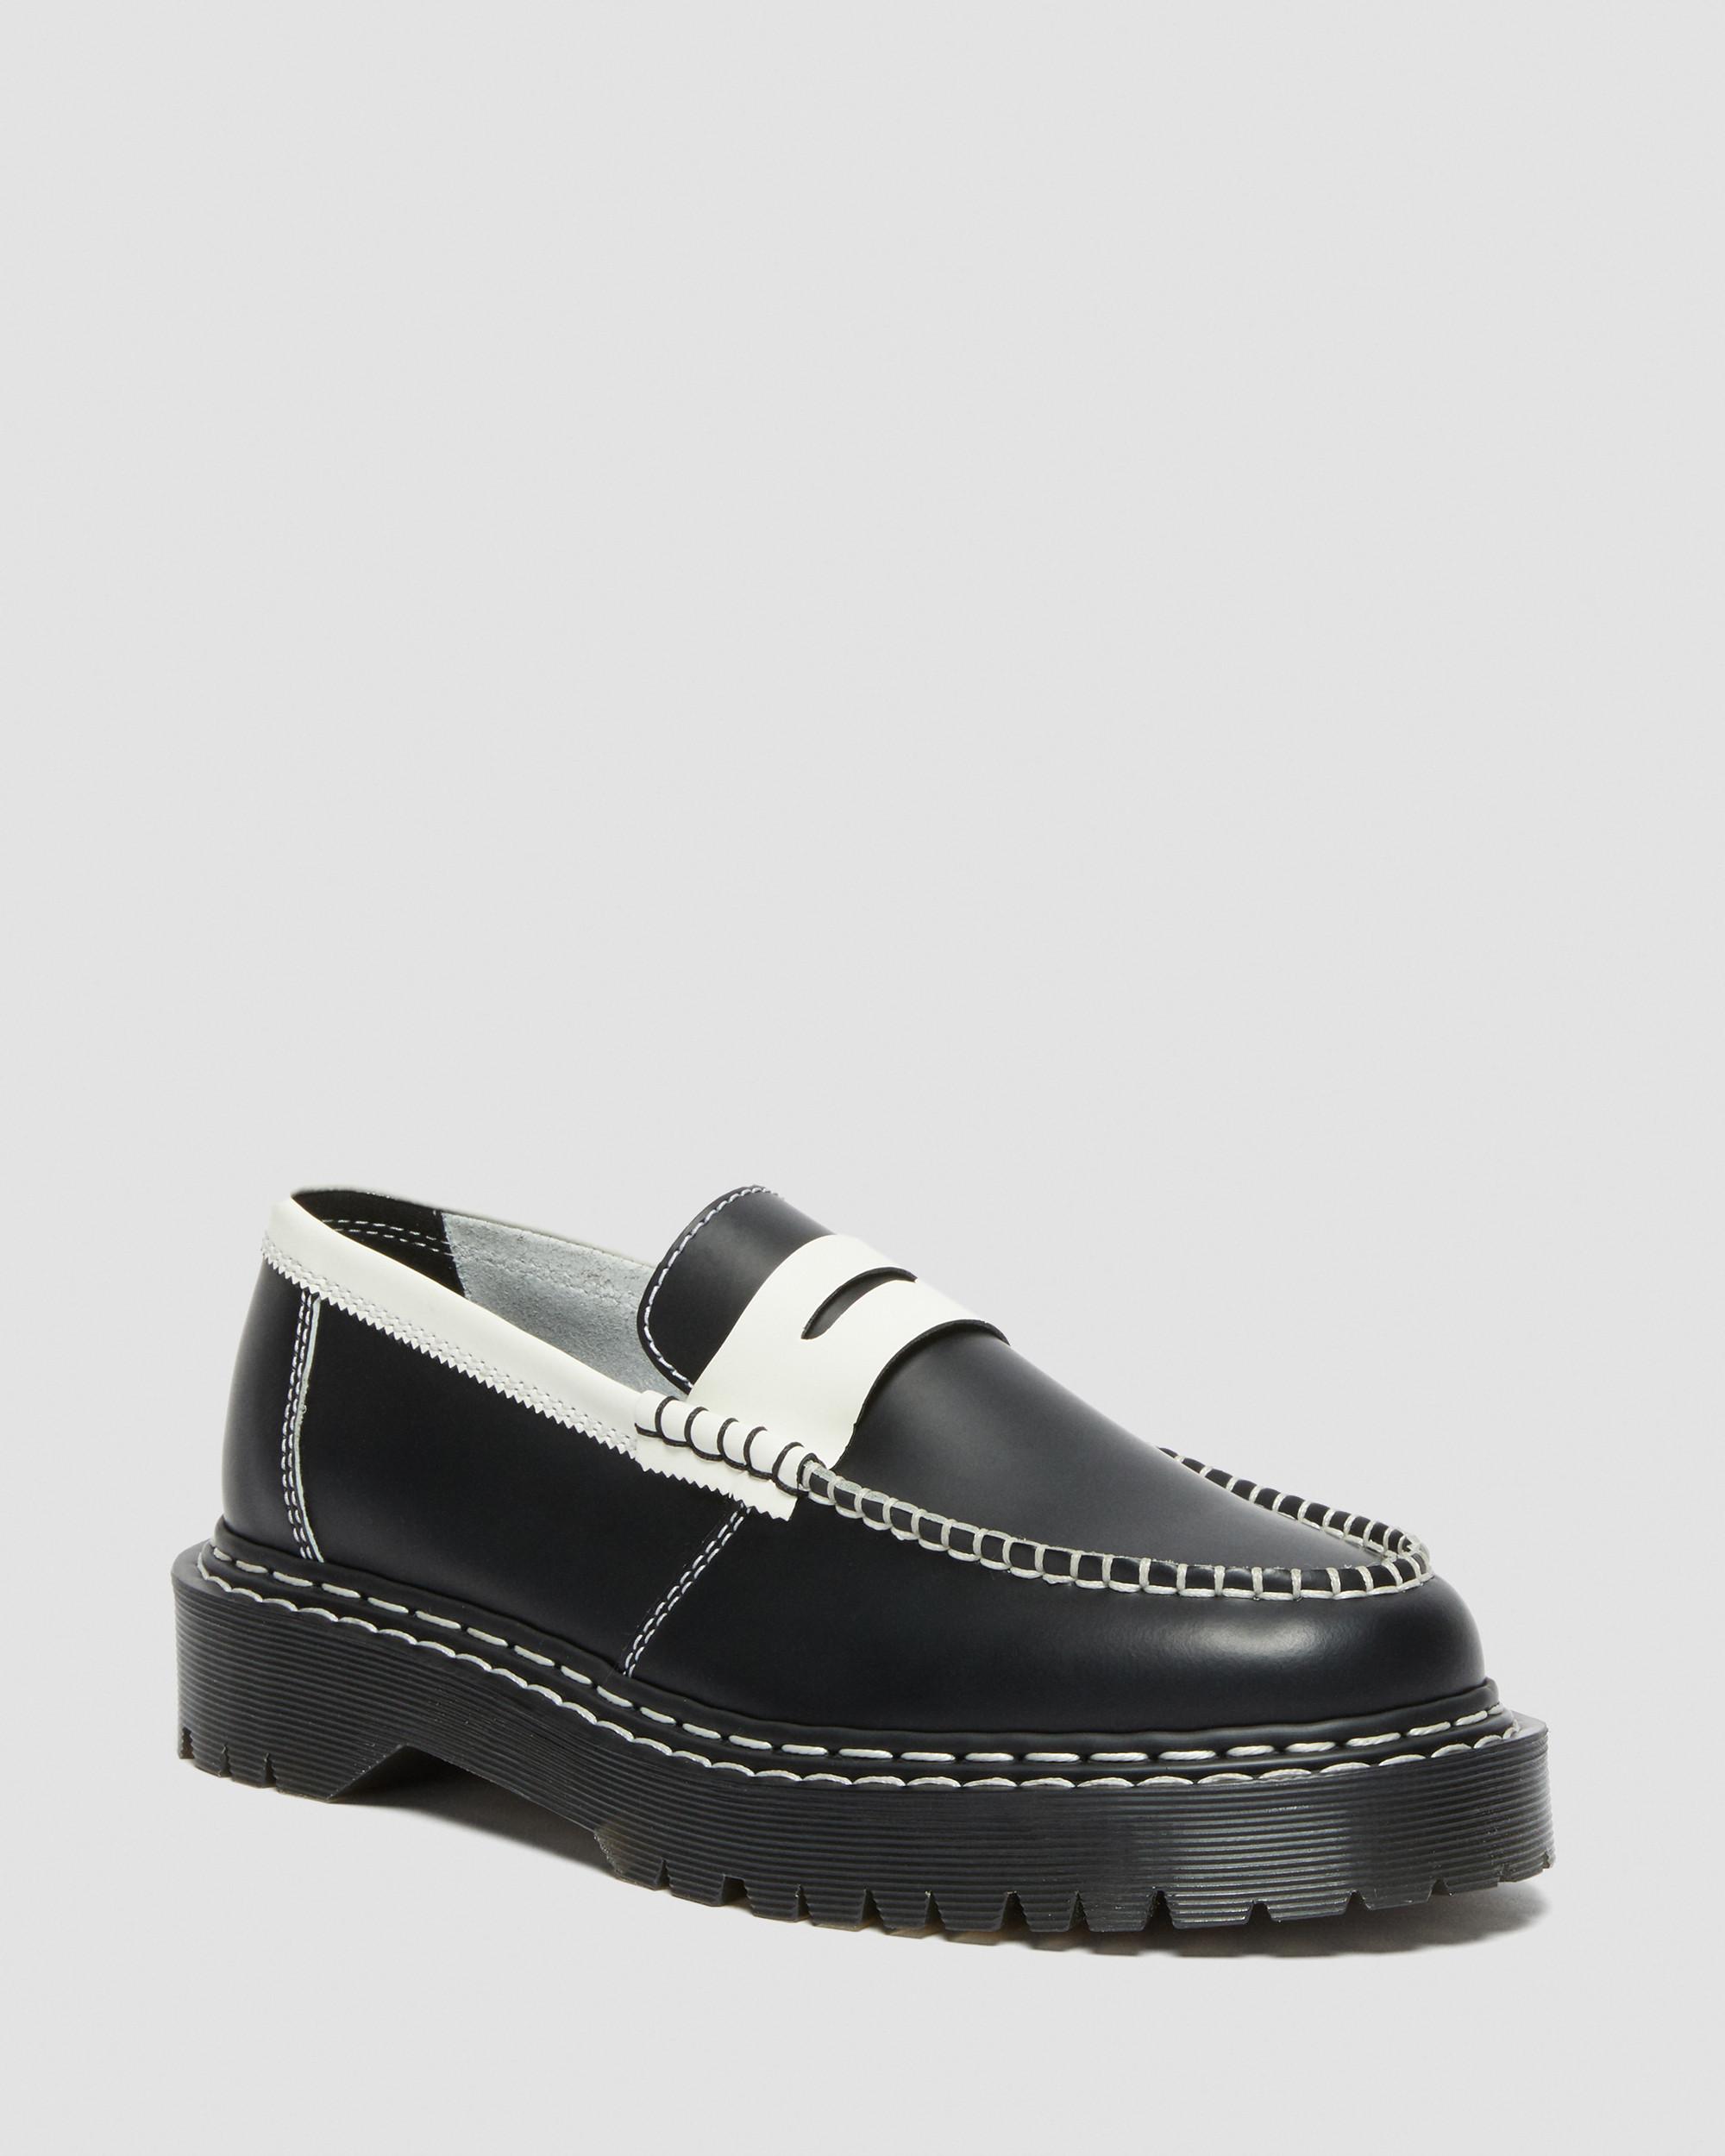 Penton Bex Contrast Leather Loafers